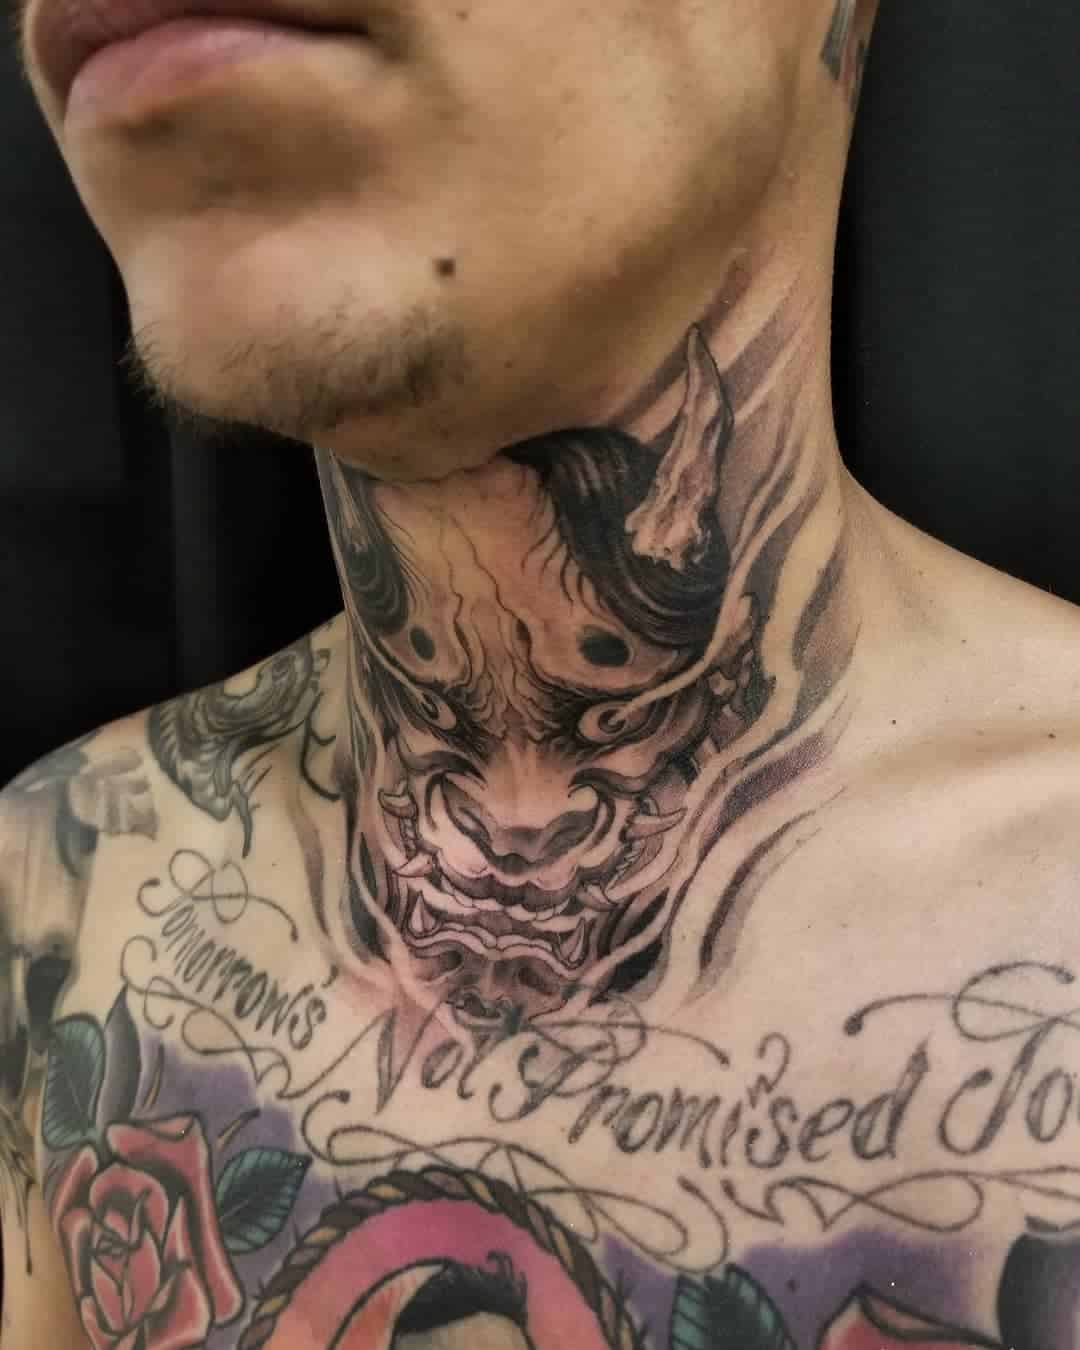 I regret getting tattoos on my face  BBC News